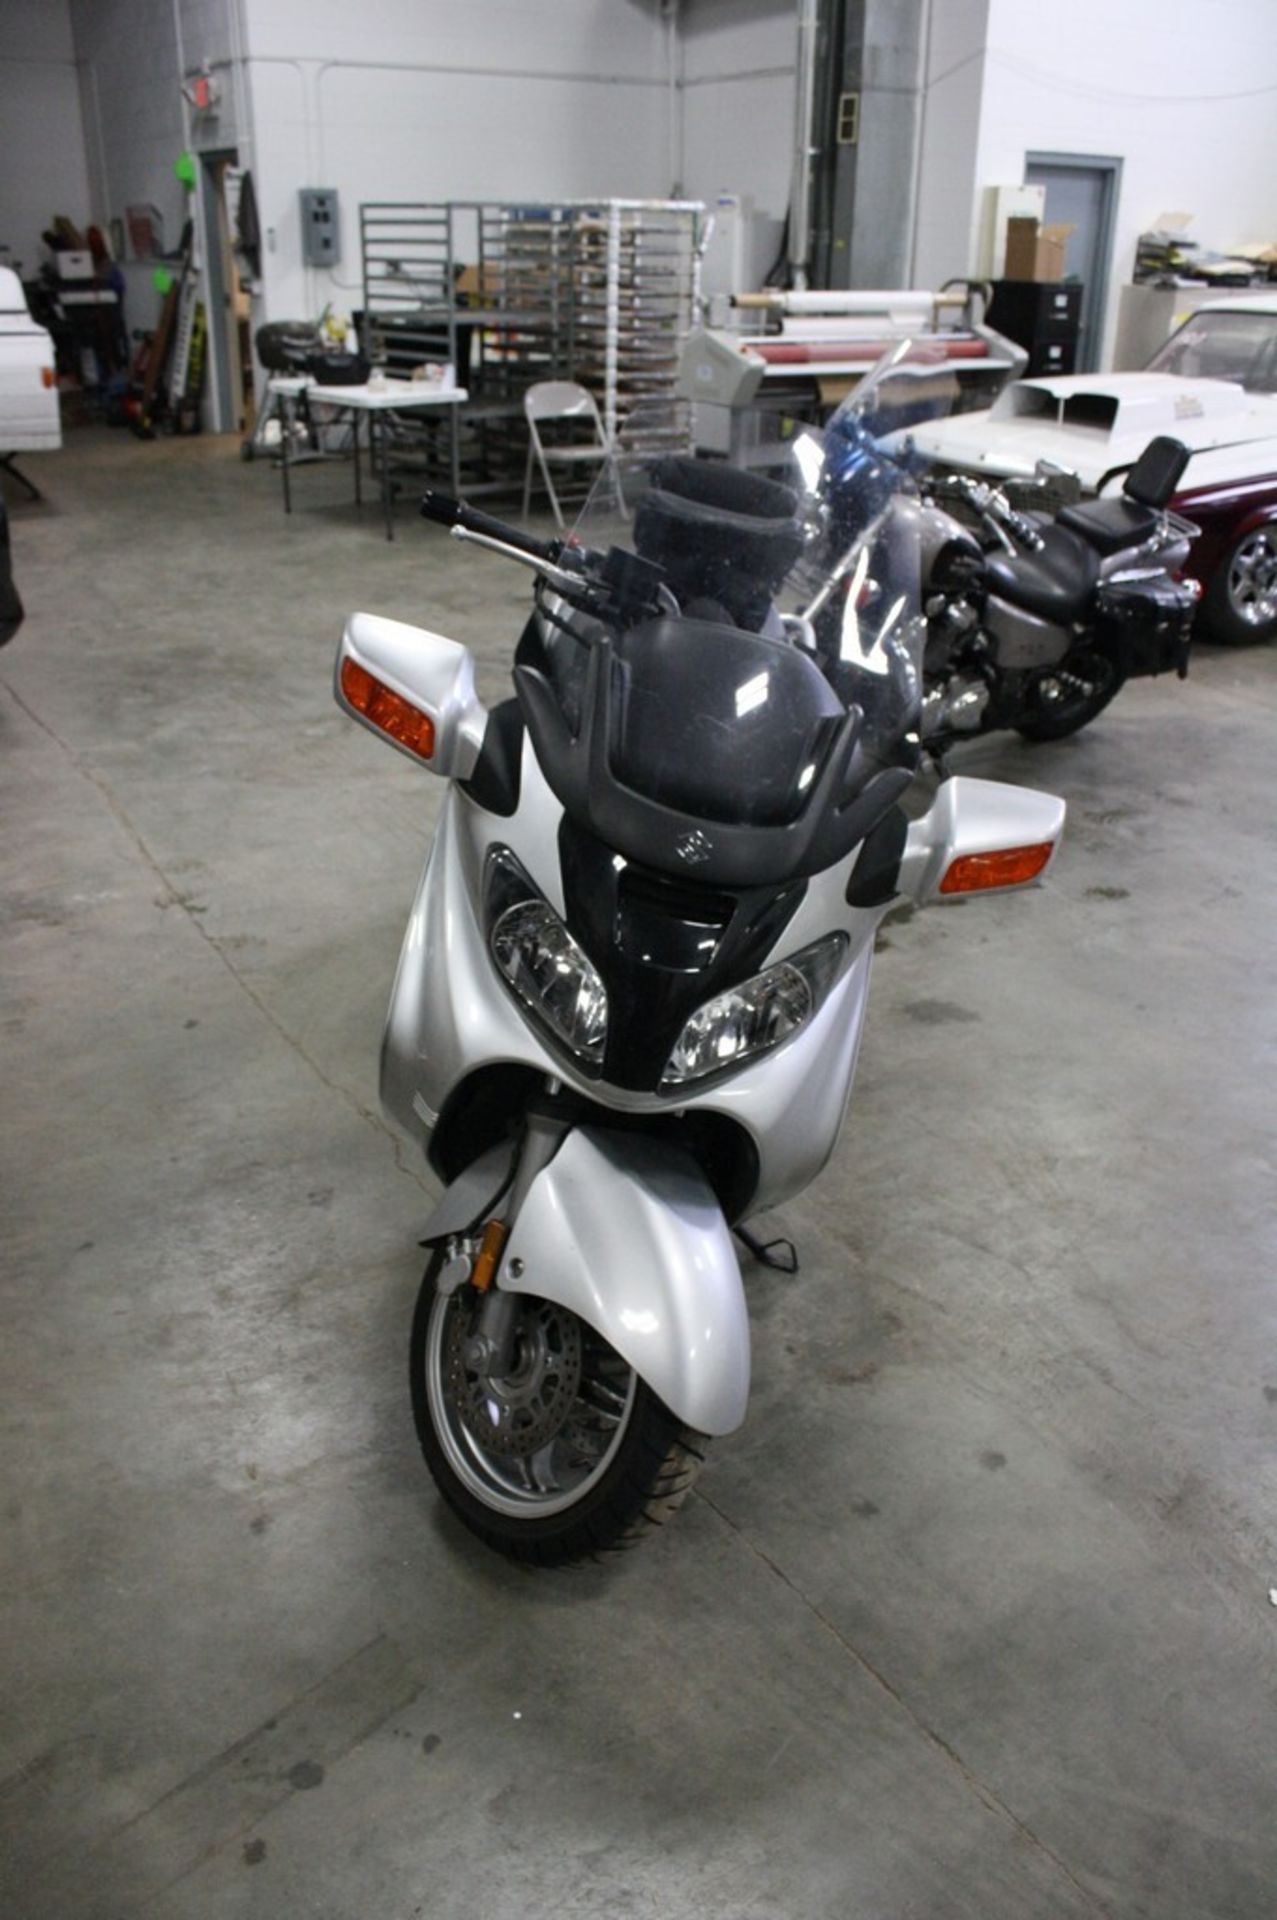 2003 SUZUKI BURGMAN 650 GAS SCOOTER VIN: JS1CP51A932101103 �, 15, 366 MILES SHOWN ON ODOMETER - Image 2 of 5